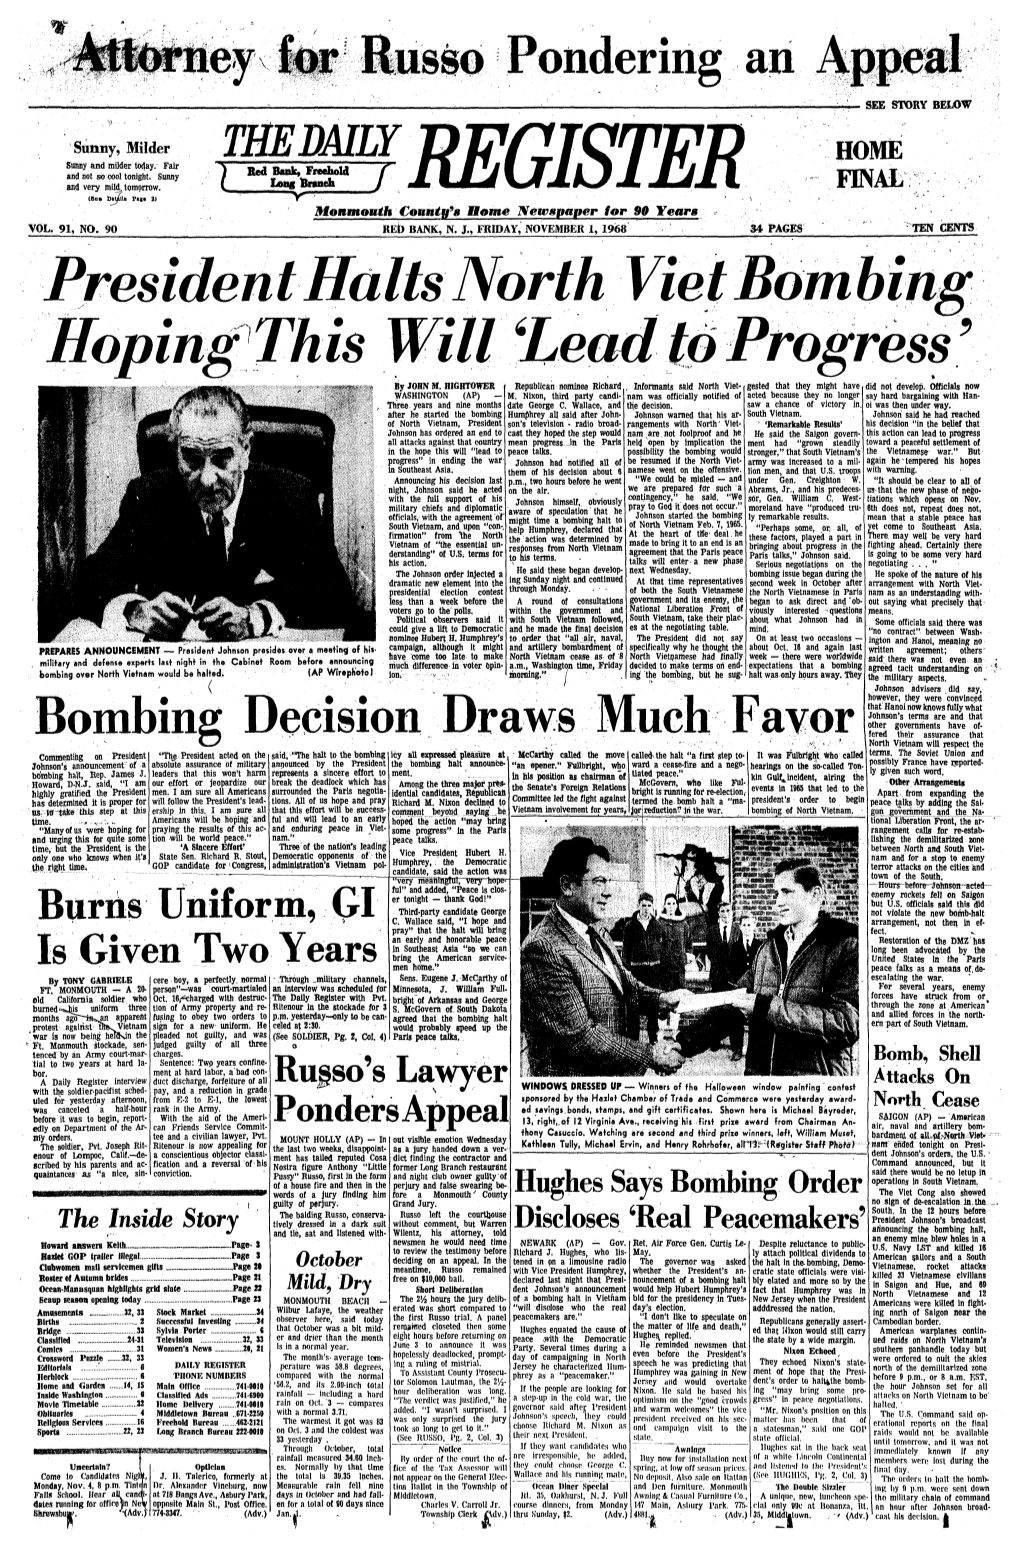 President Halts North Viet Bombing Hoping This by JOHN M